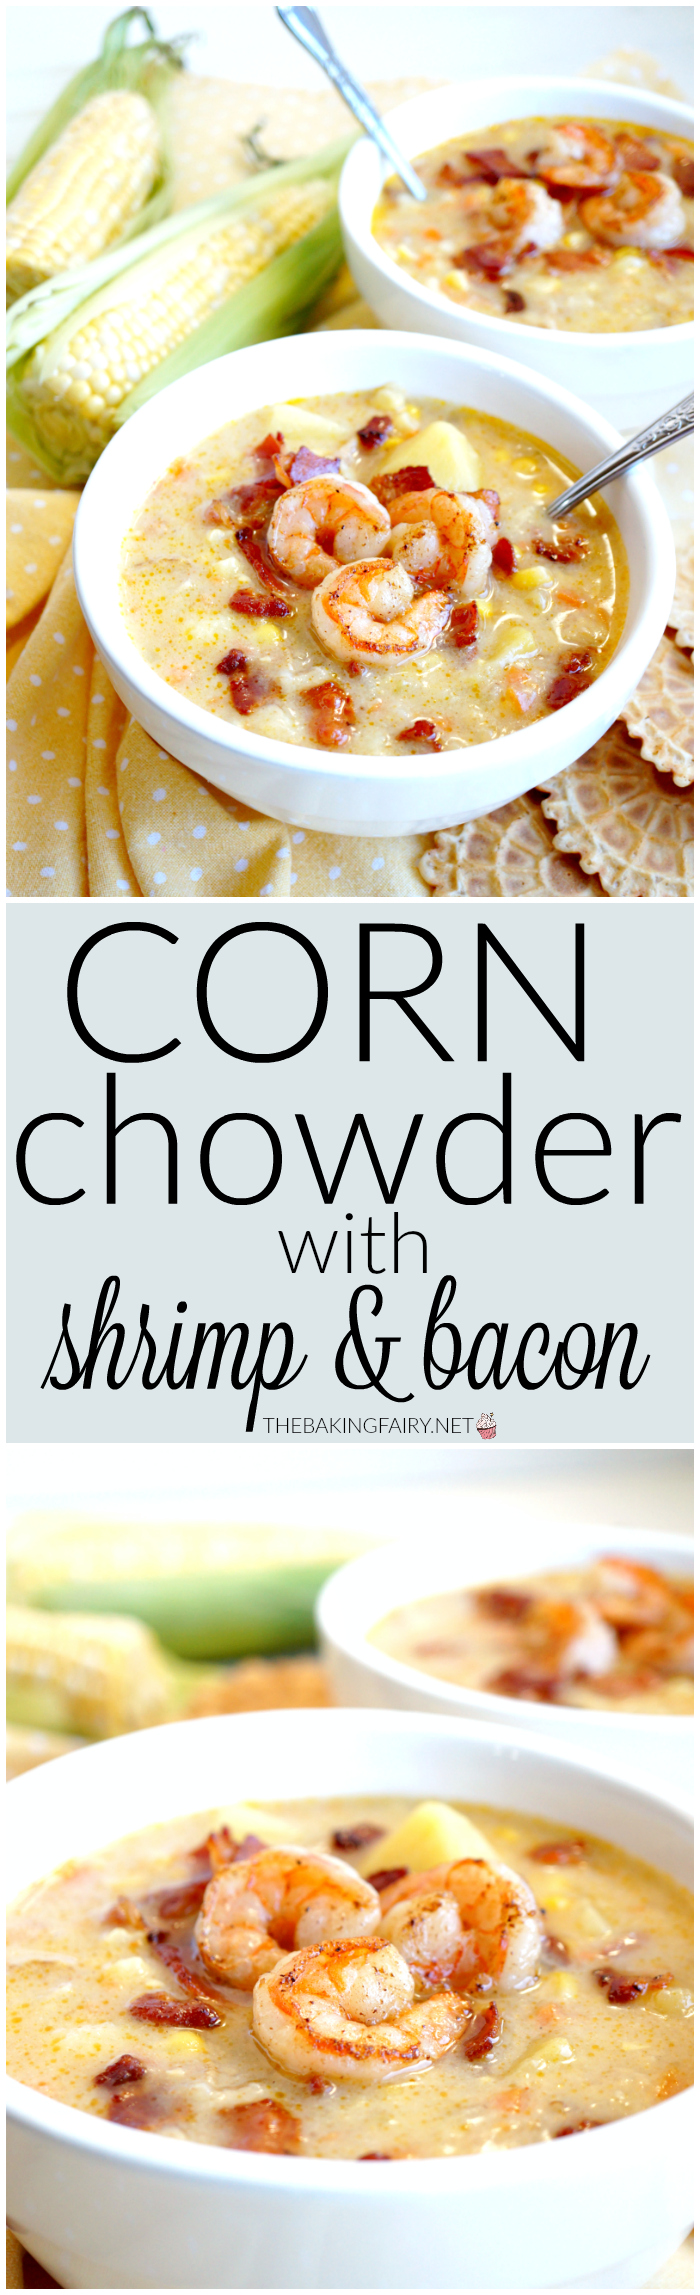 corn chowder with shrimp | The Baking Fairy